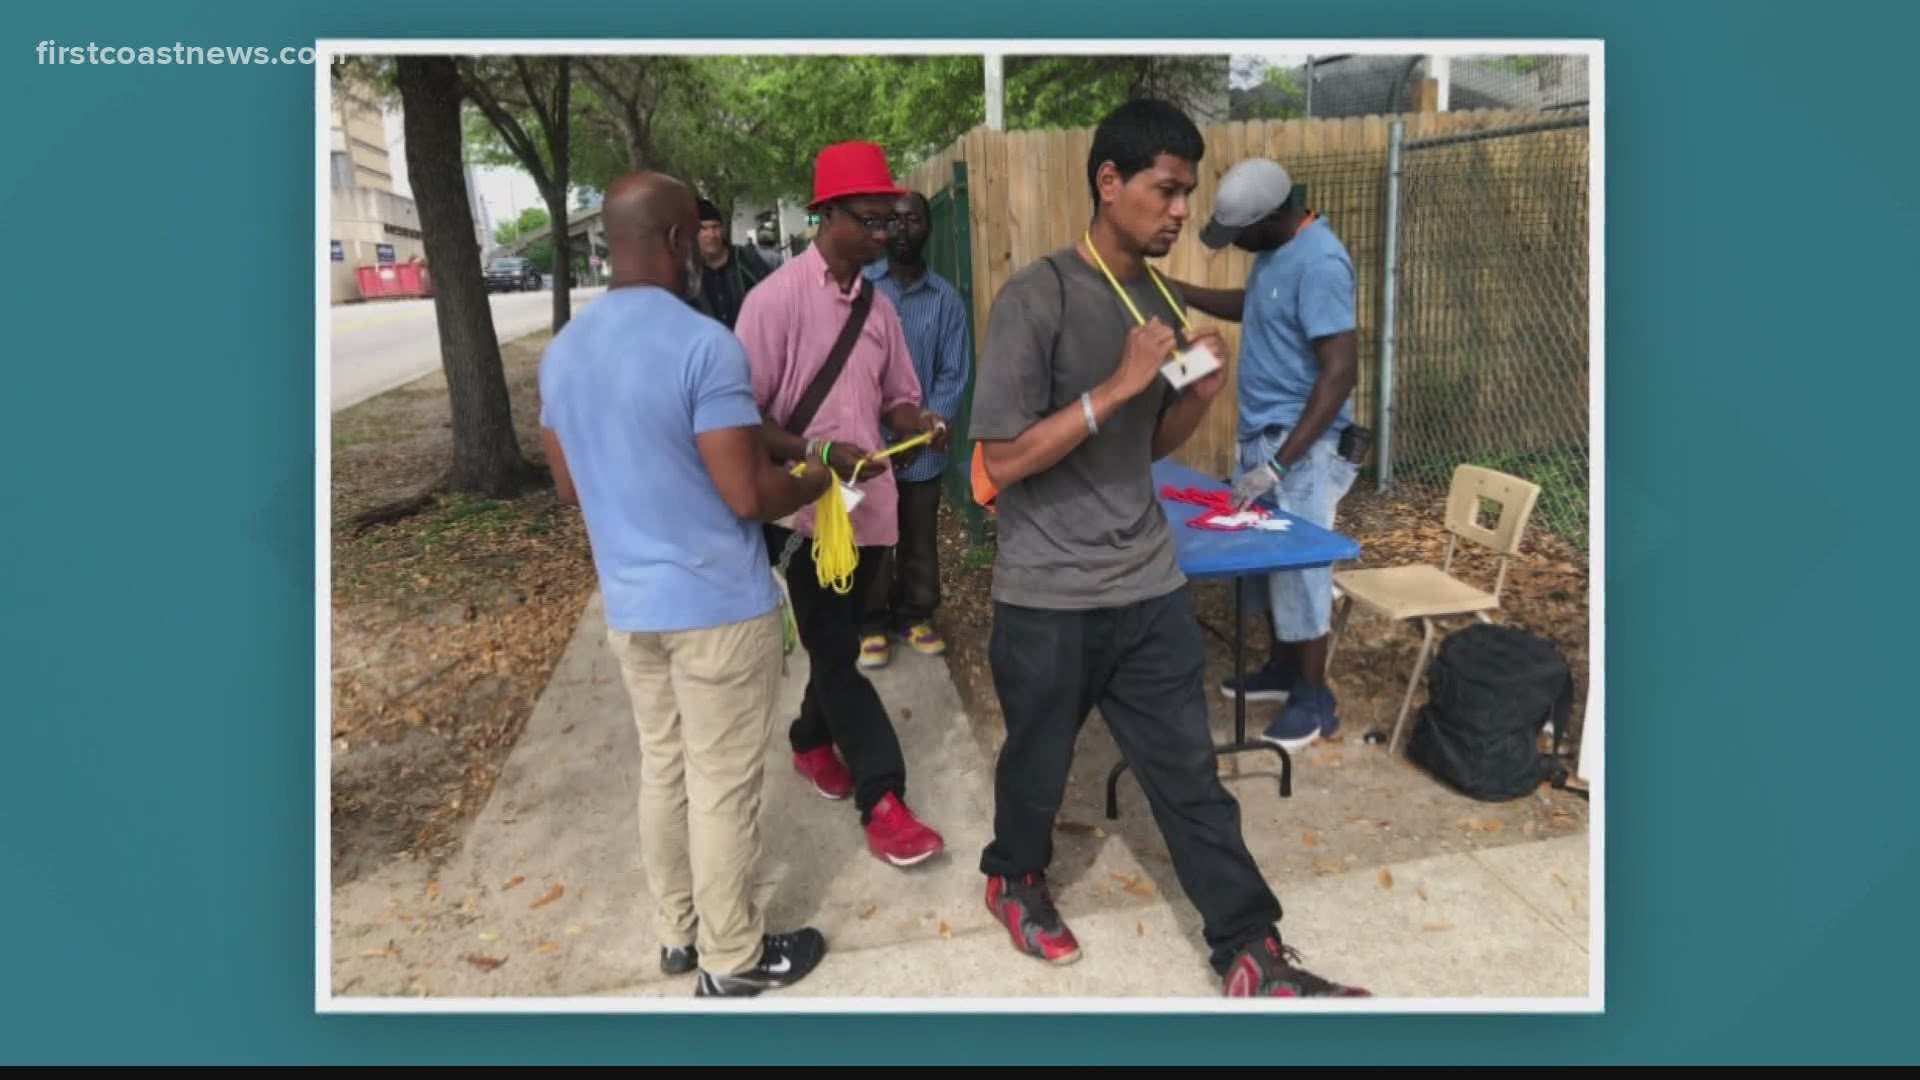 Jacksonville is one of two cities in the US where all homeless people were tested for coronavirus. Of the nearly 700 tested here, all of the results were negatives.